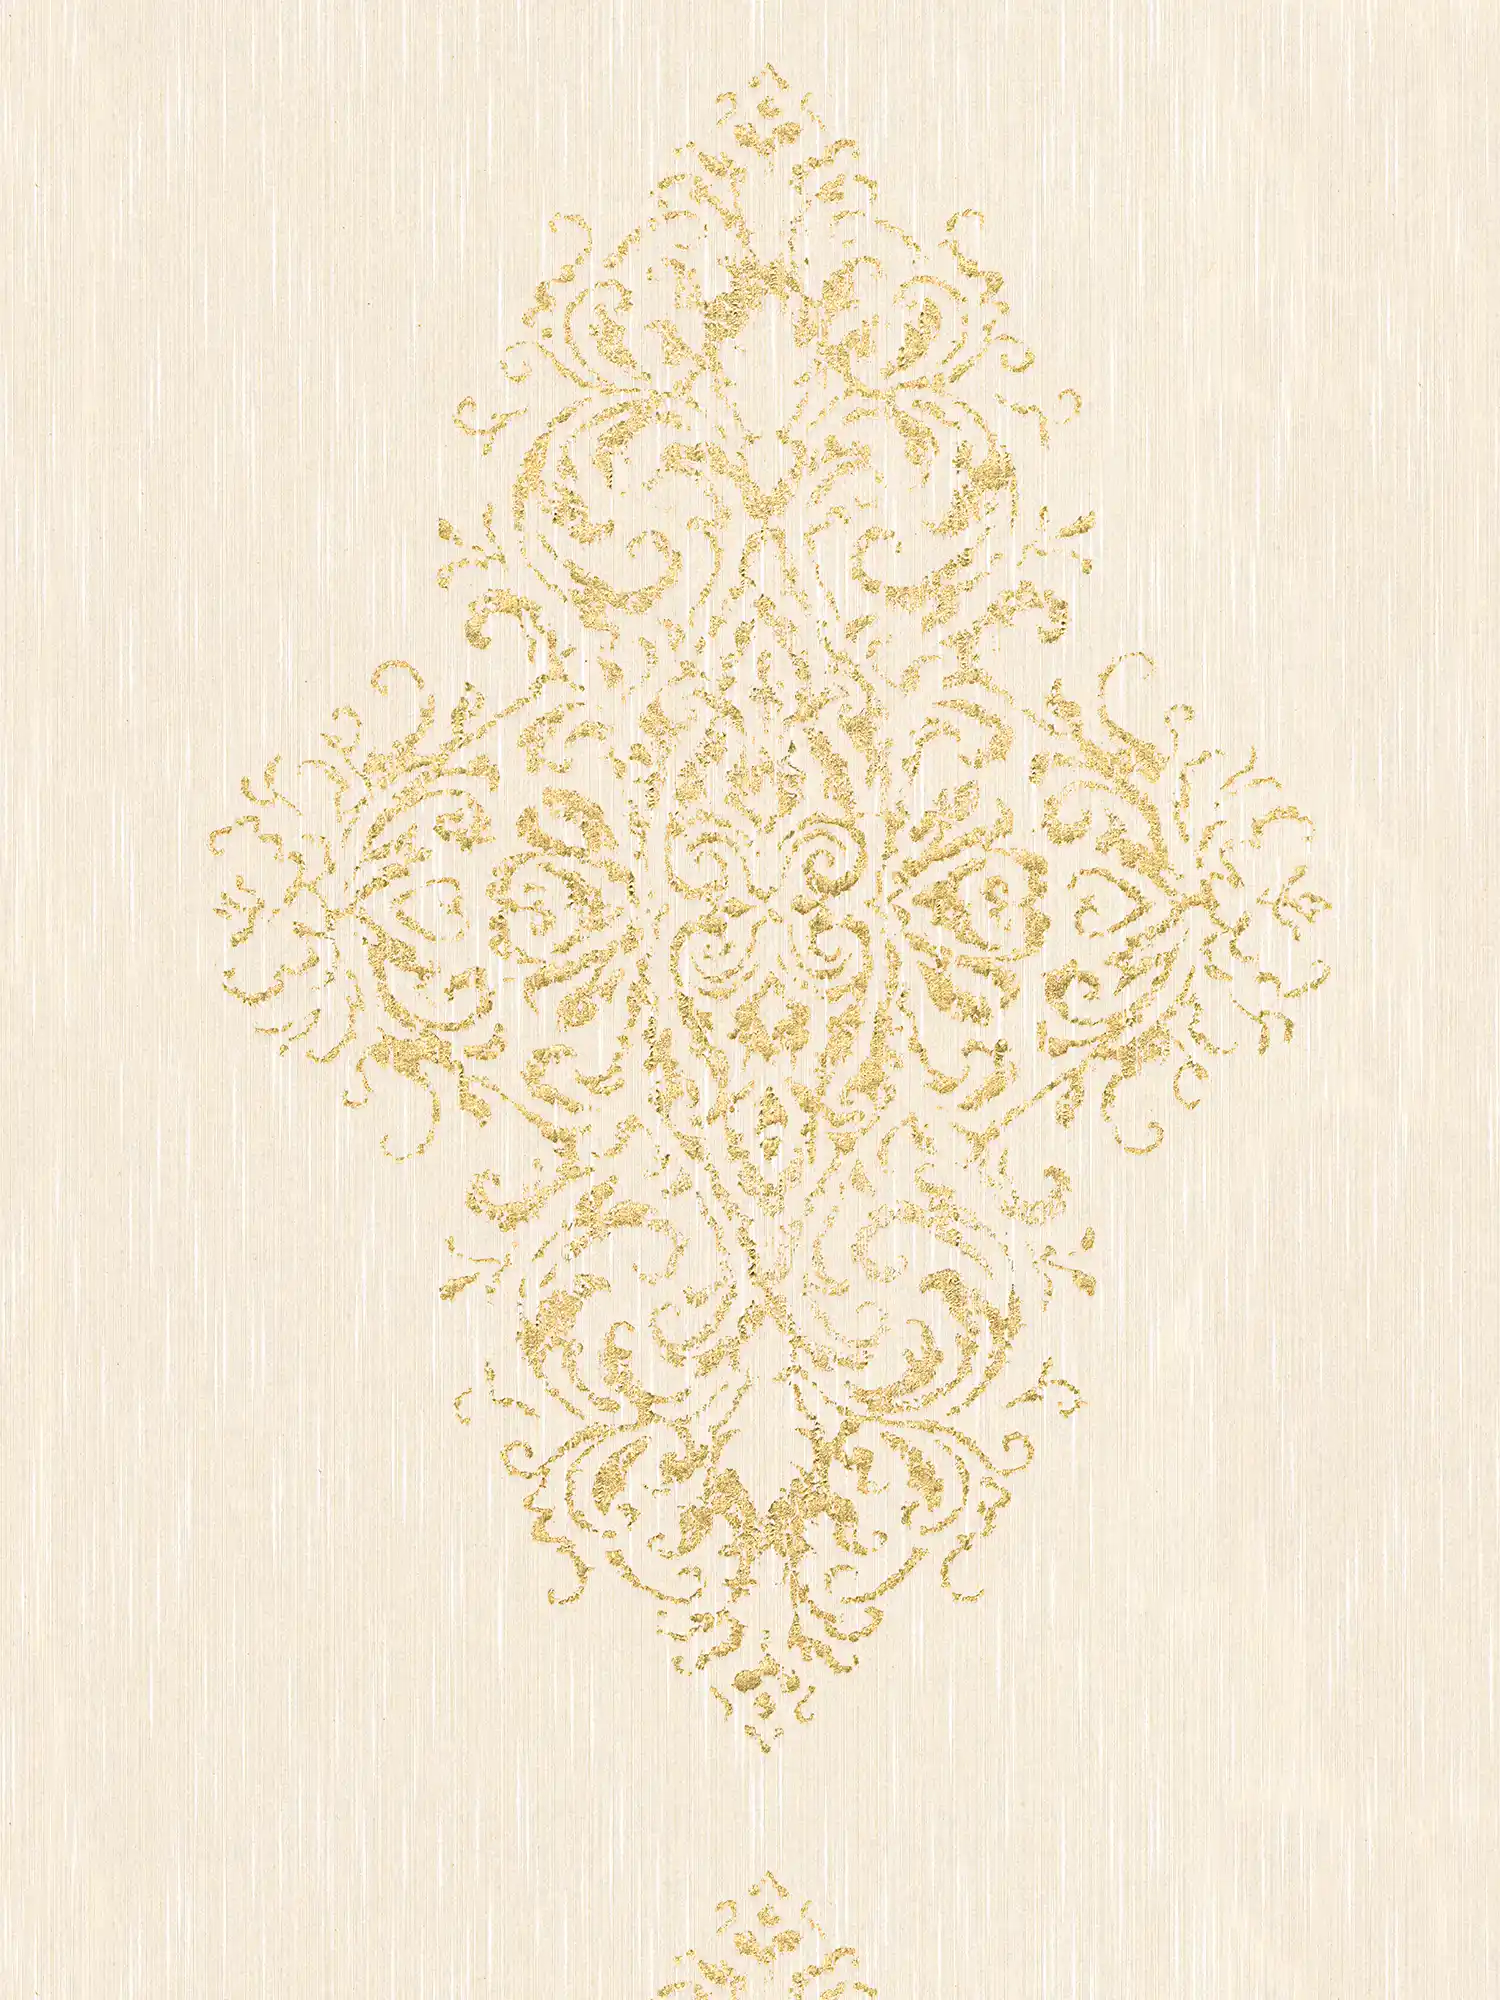 Ornament wallpaper with metallic effect in used look - cream, gold
